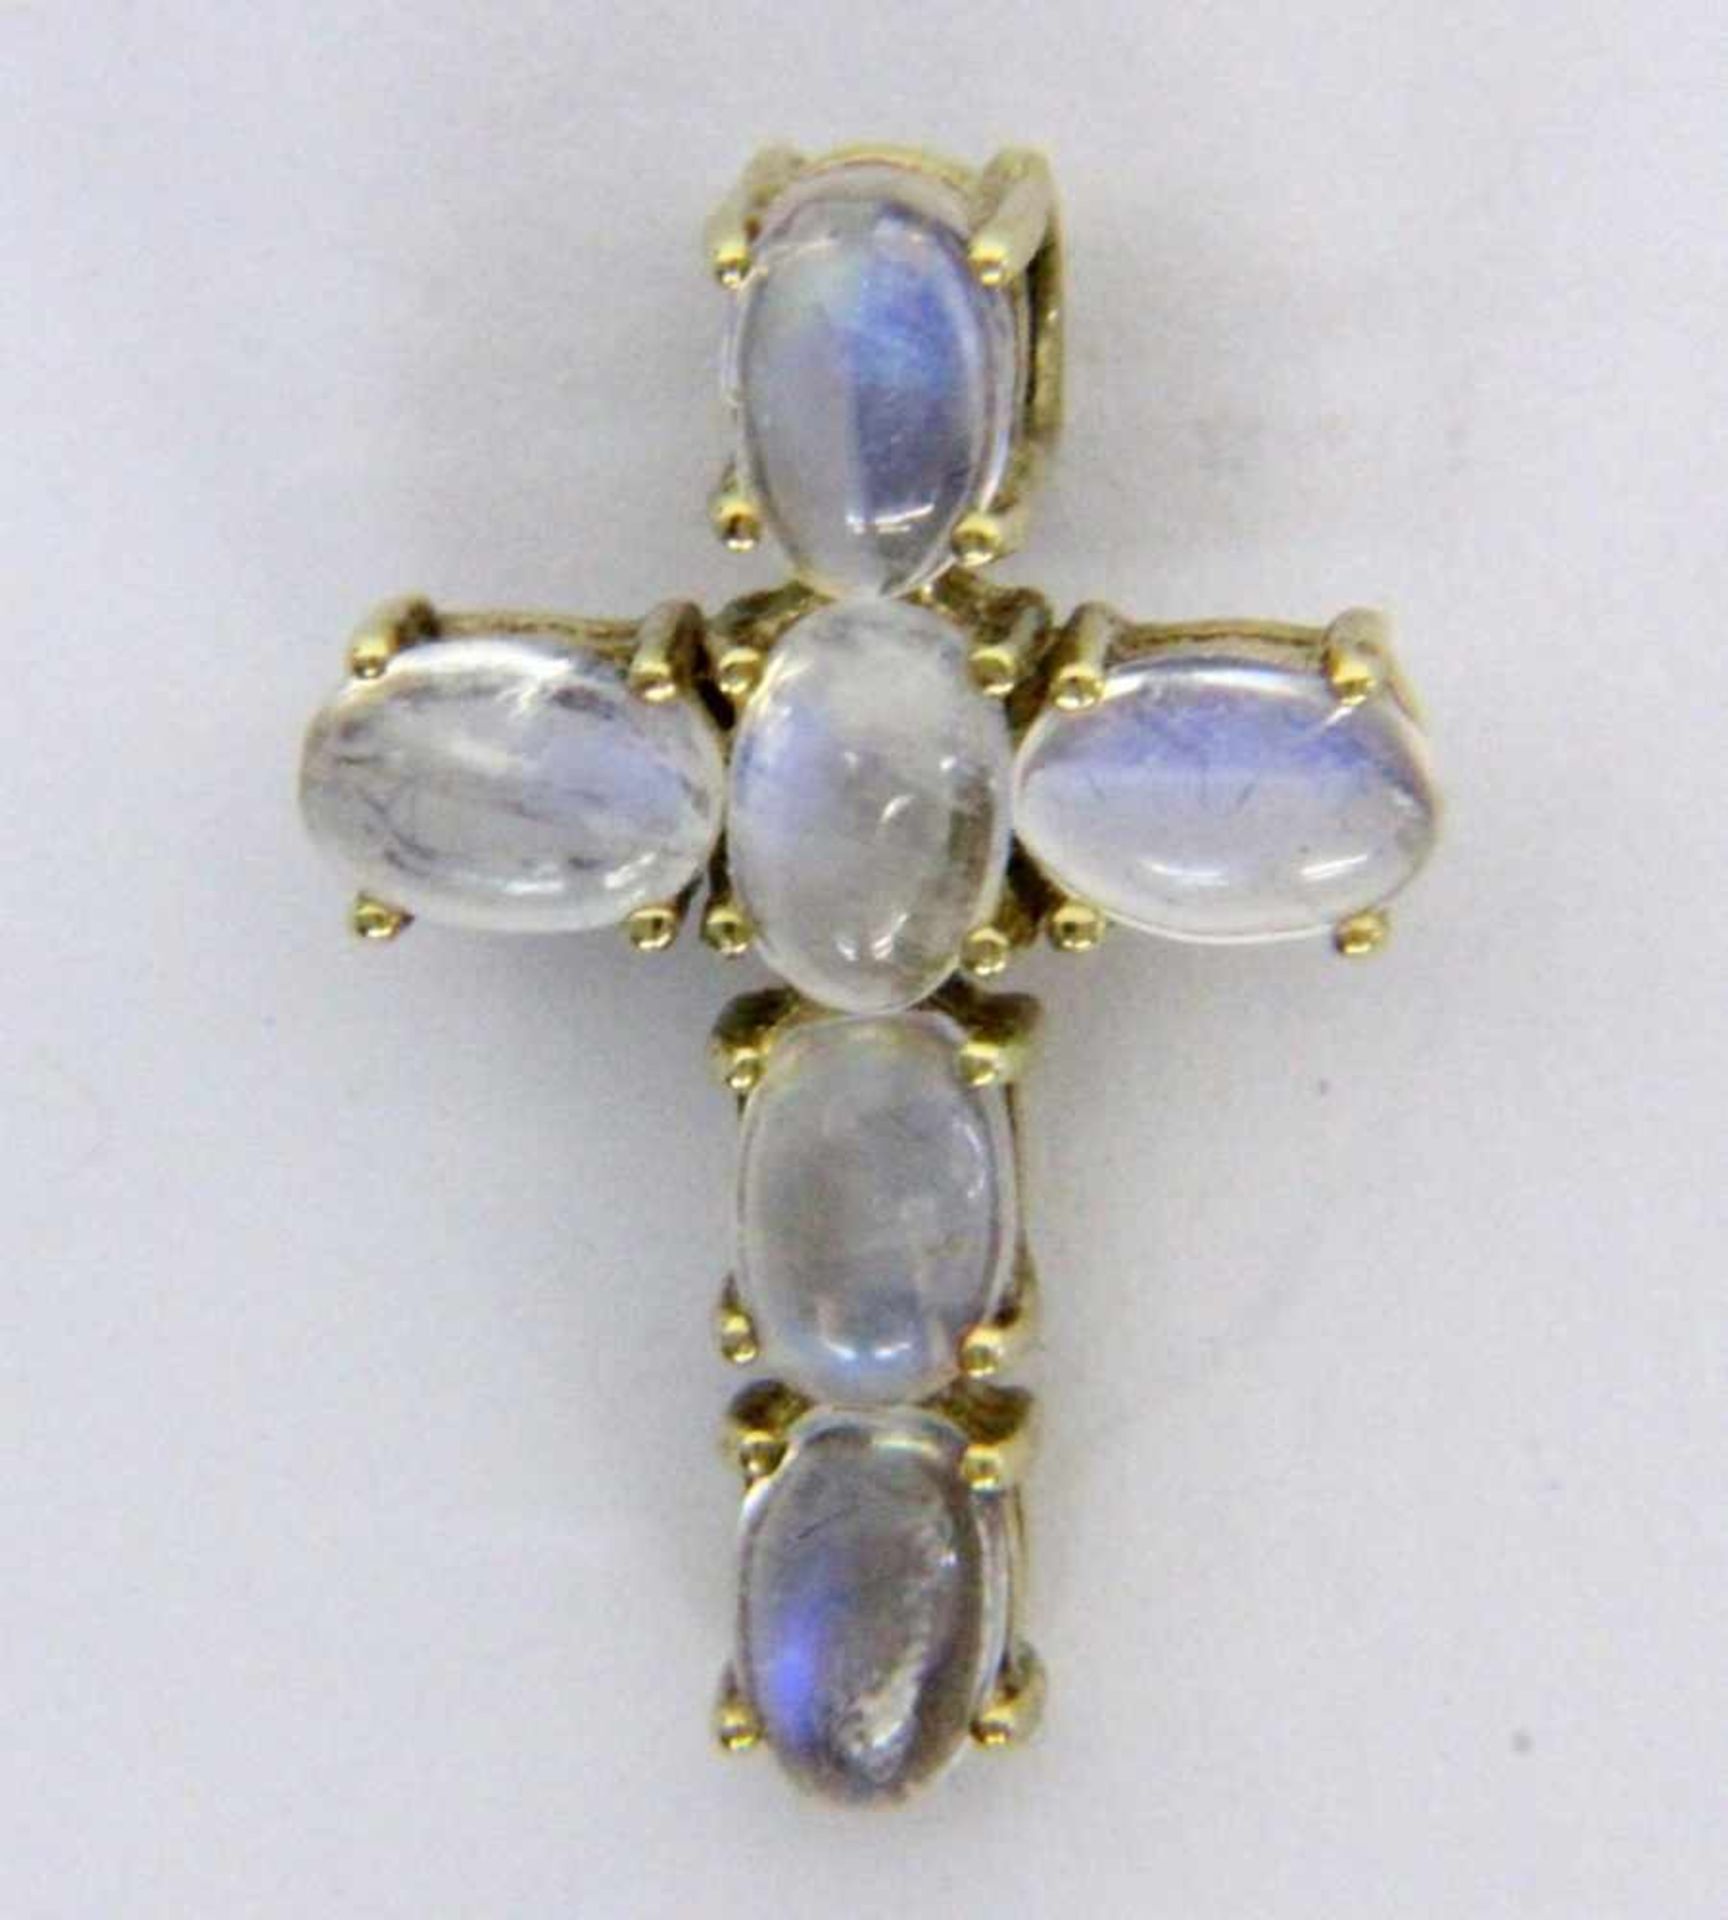 ''A CROSS PENDANT 585/000 yellow gold with 5 moonstone cabochons. 23 mm longKeywords: